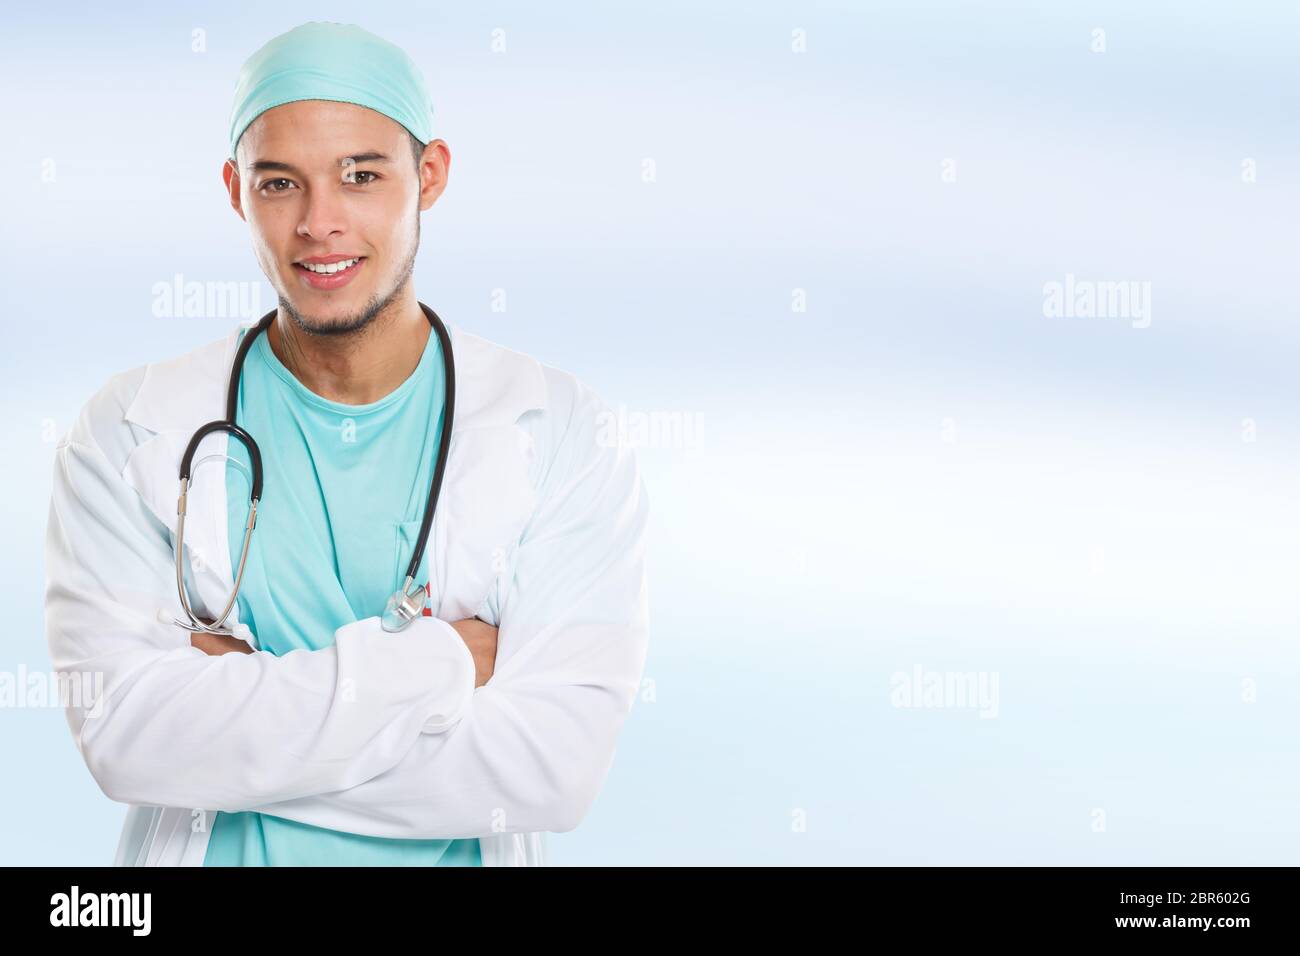 Young doctor portrait occupation education latin man job doctor's overall copyspace copy space male Stock Photo